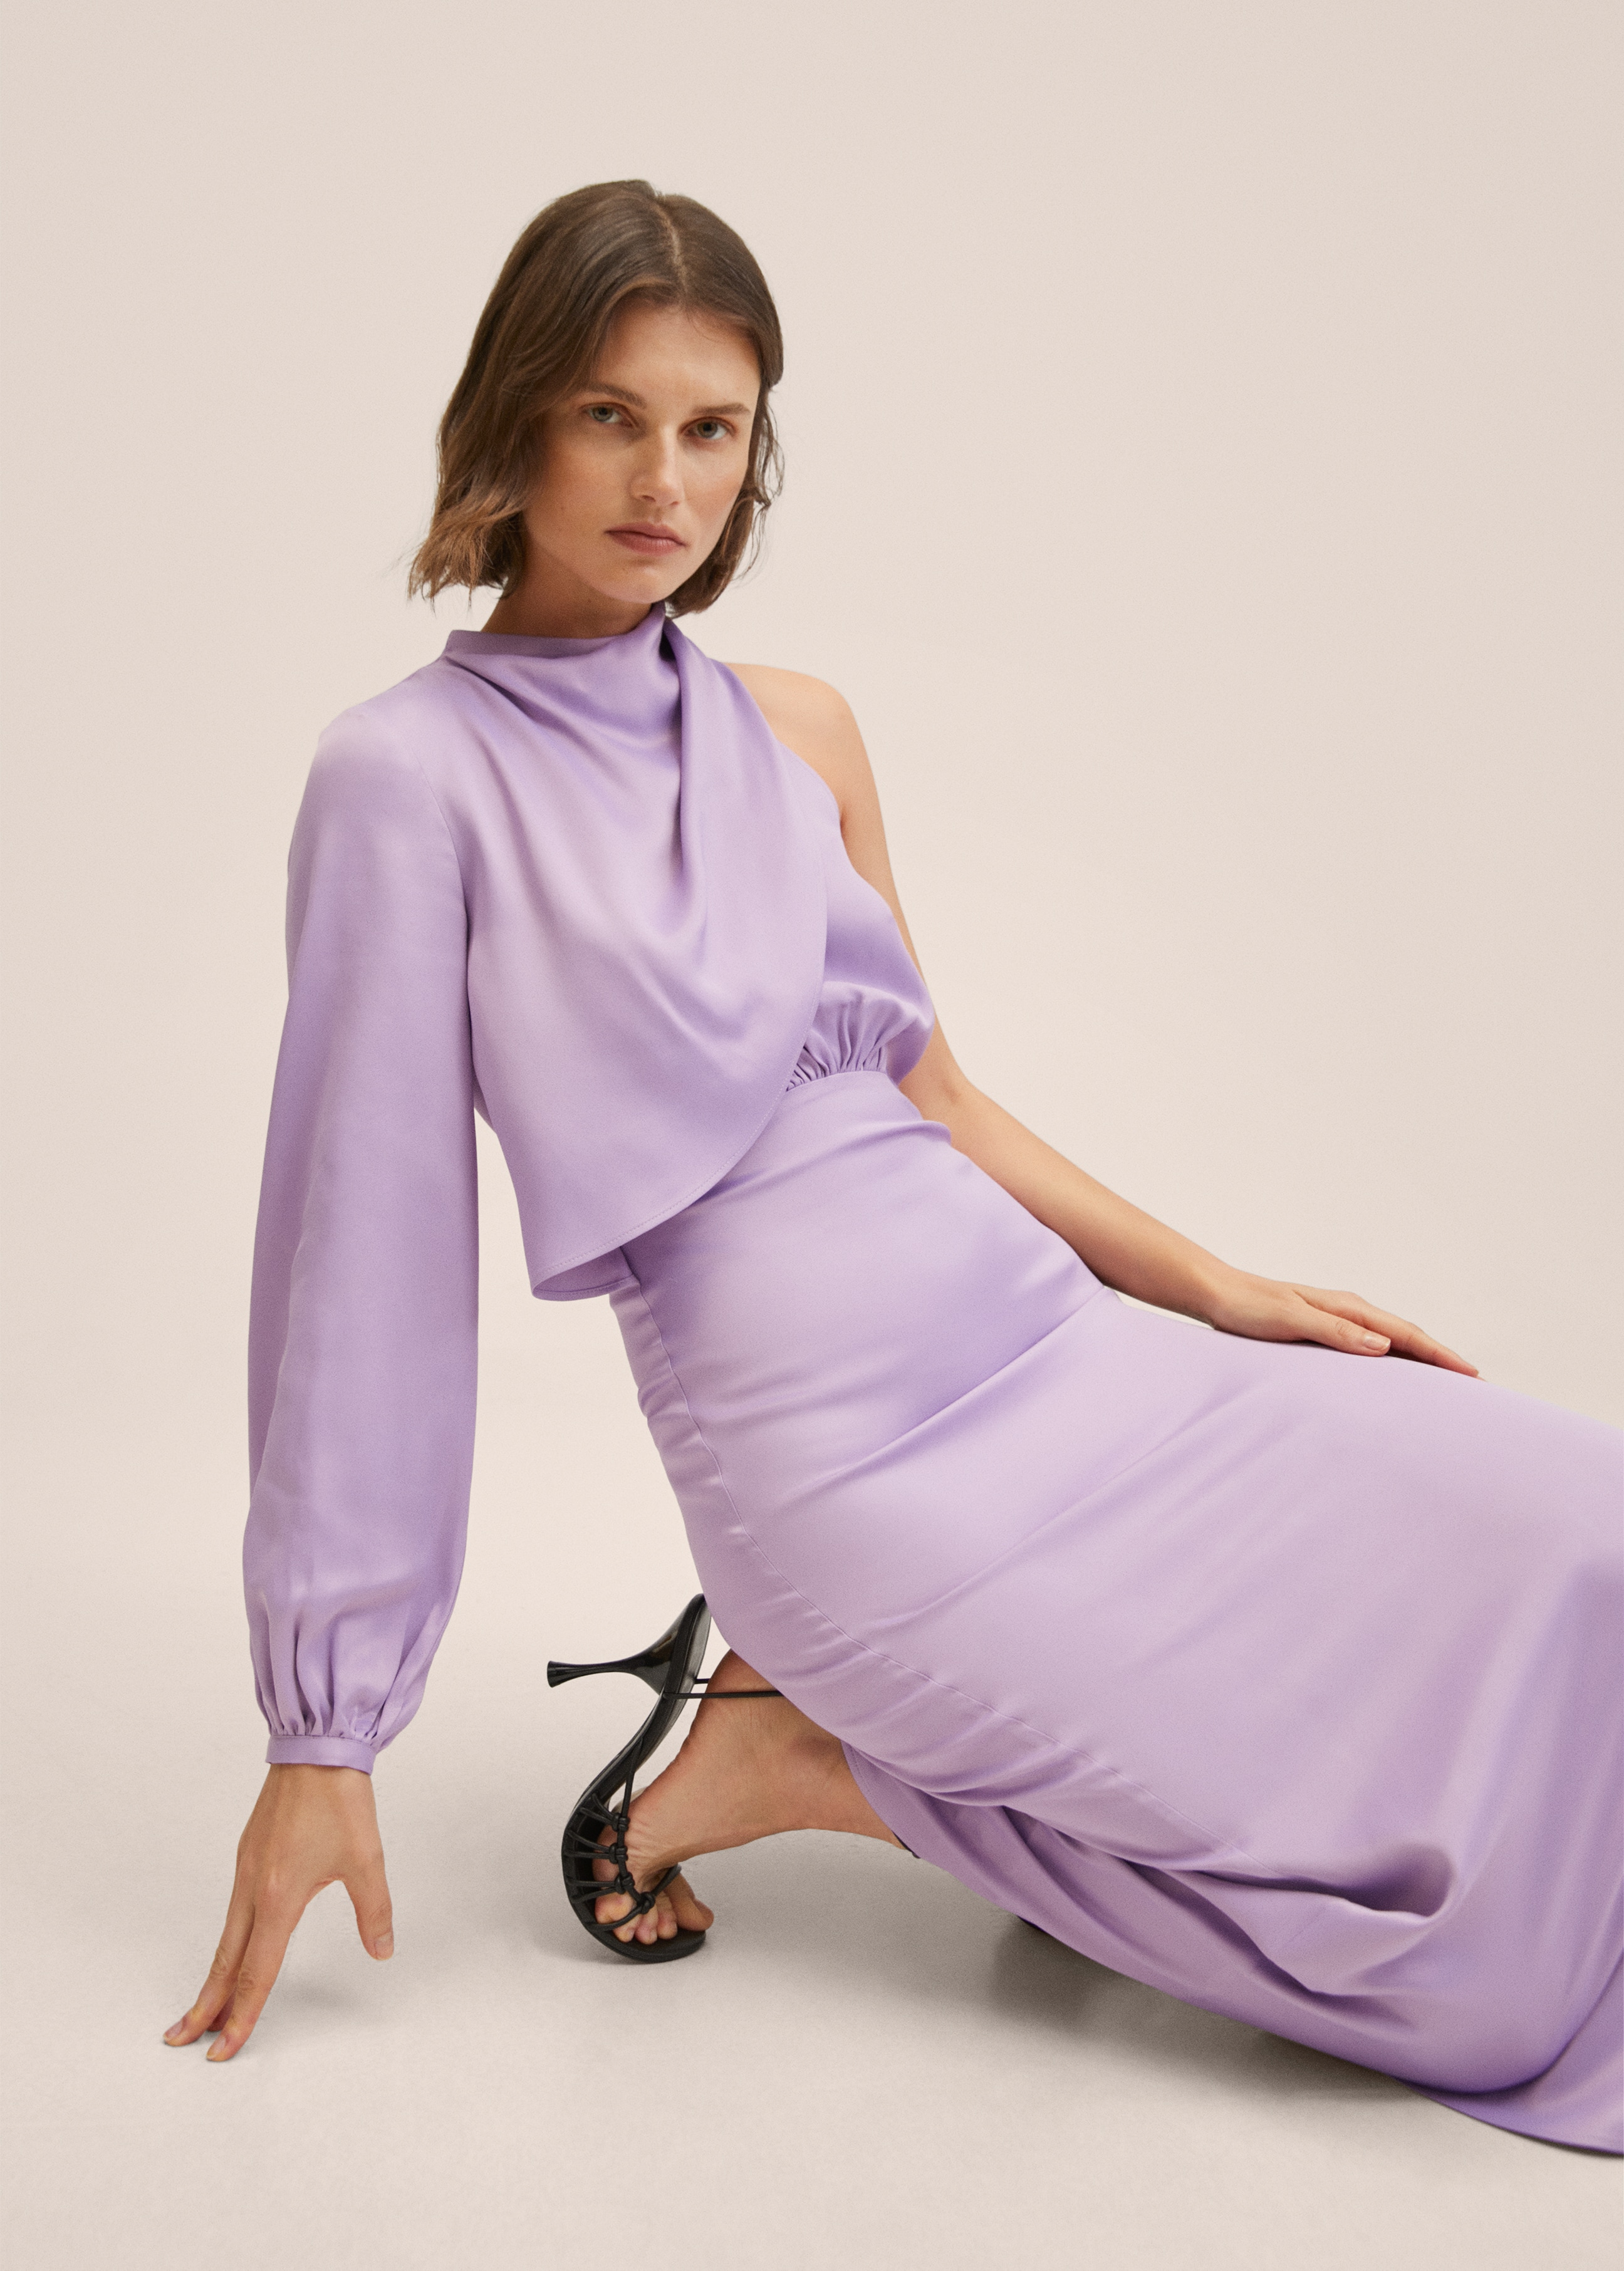 Asymmetrical satin dress - Details of the article 2